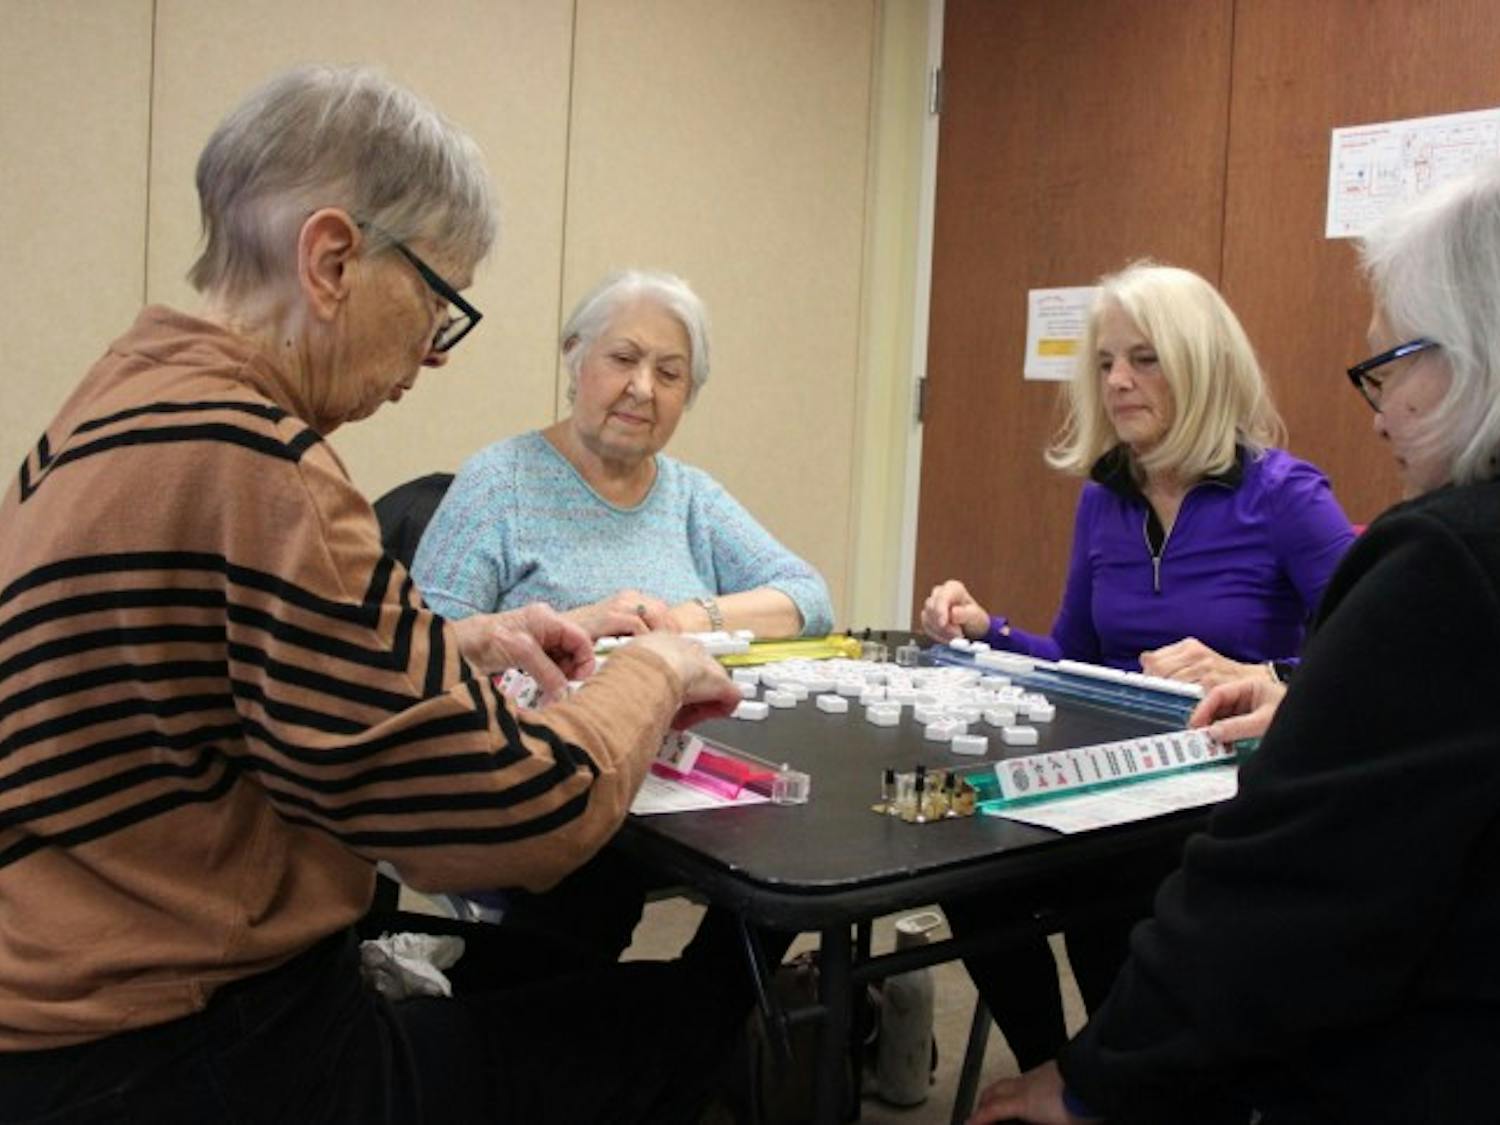 After lunch, a group of Surrey members engage in a mahjong game. Cards and board games are set up, and members are free to play. The National Academies of Sciences, Engineering, and Medicine reported that nearly one-fourth of adults aged 65 and older are considered to be socially isolated.